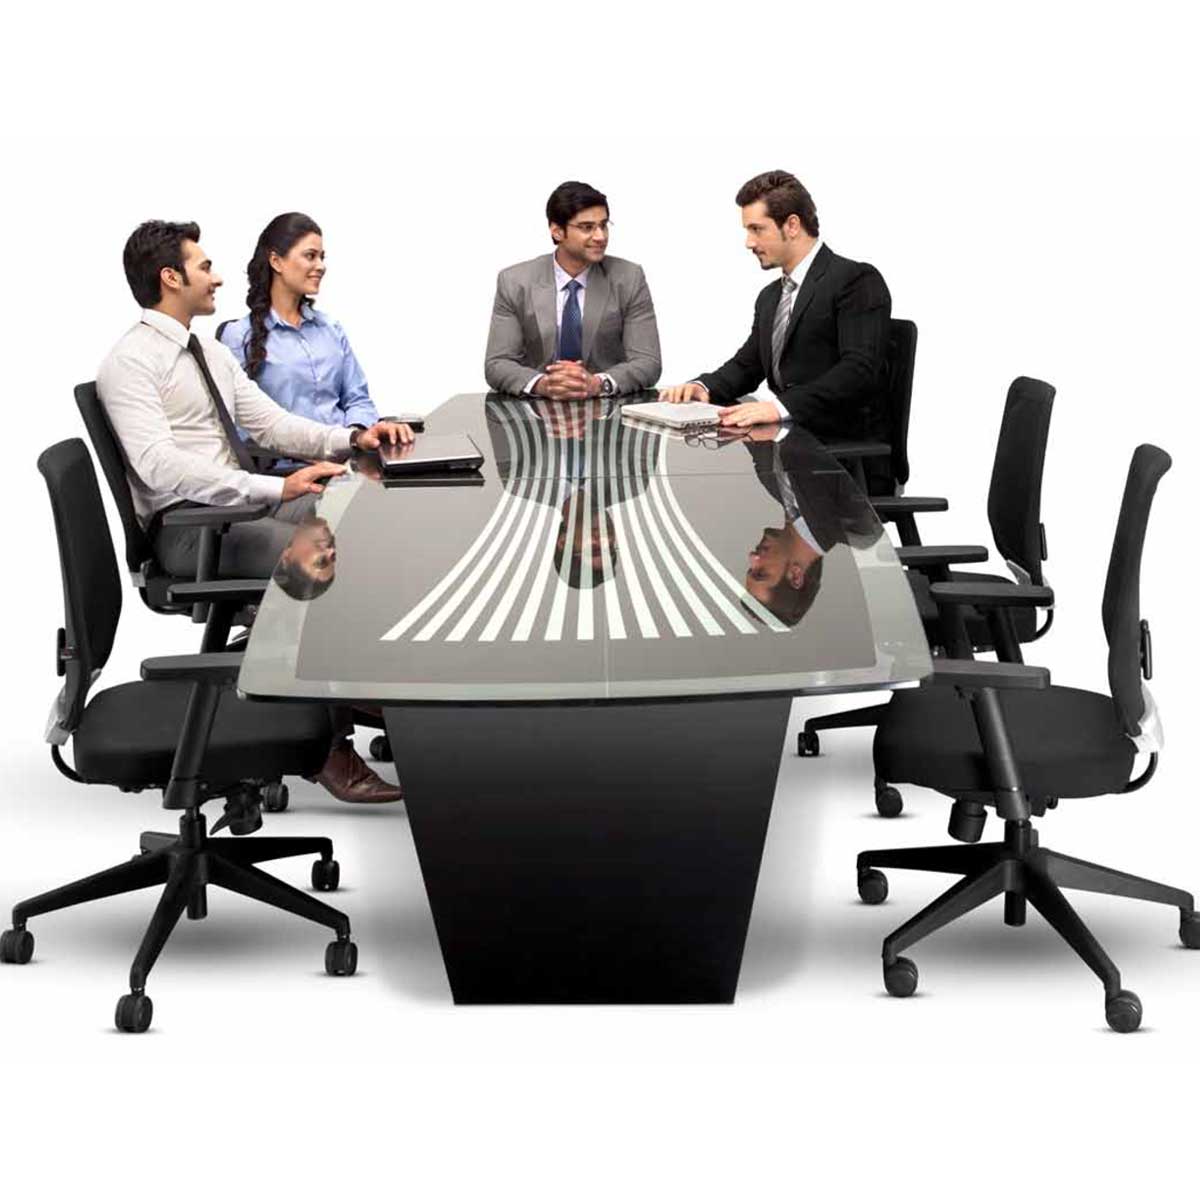 Metal Office Table Manufacturers, Suppliers in Tuglakabad